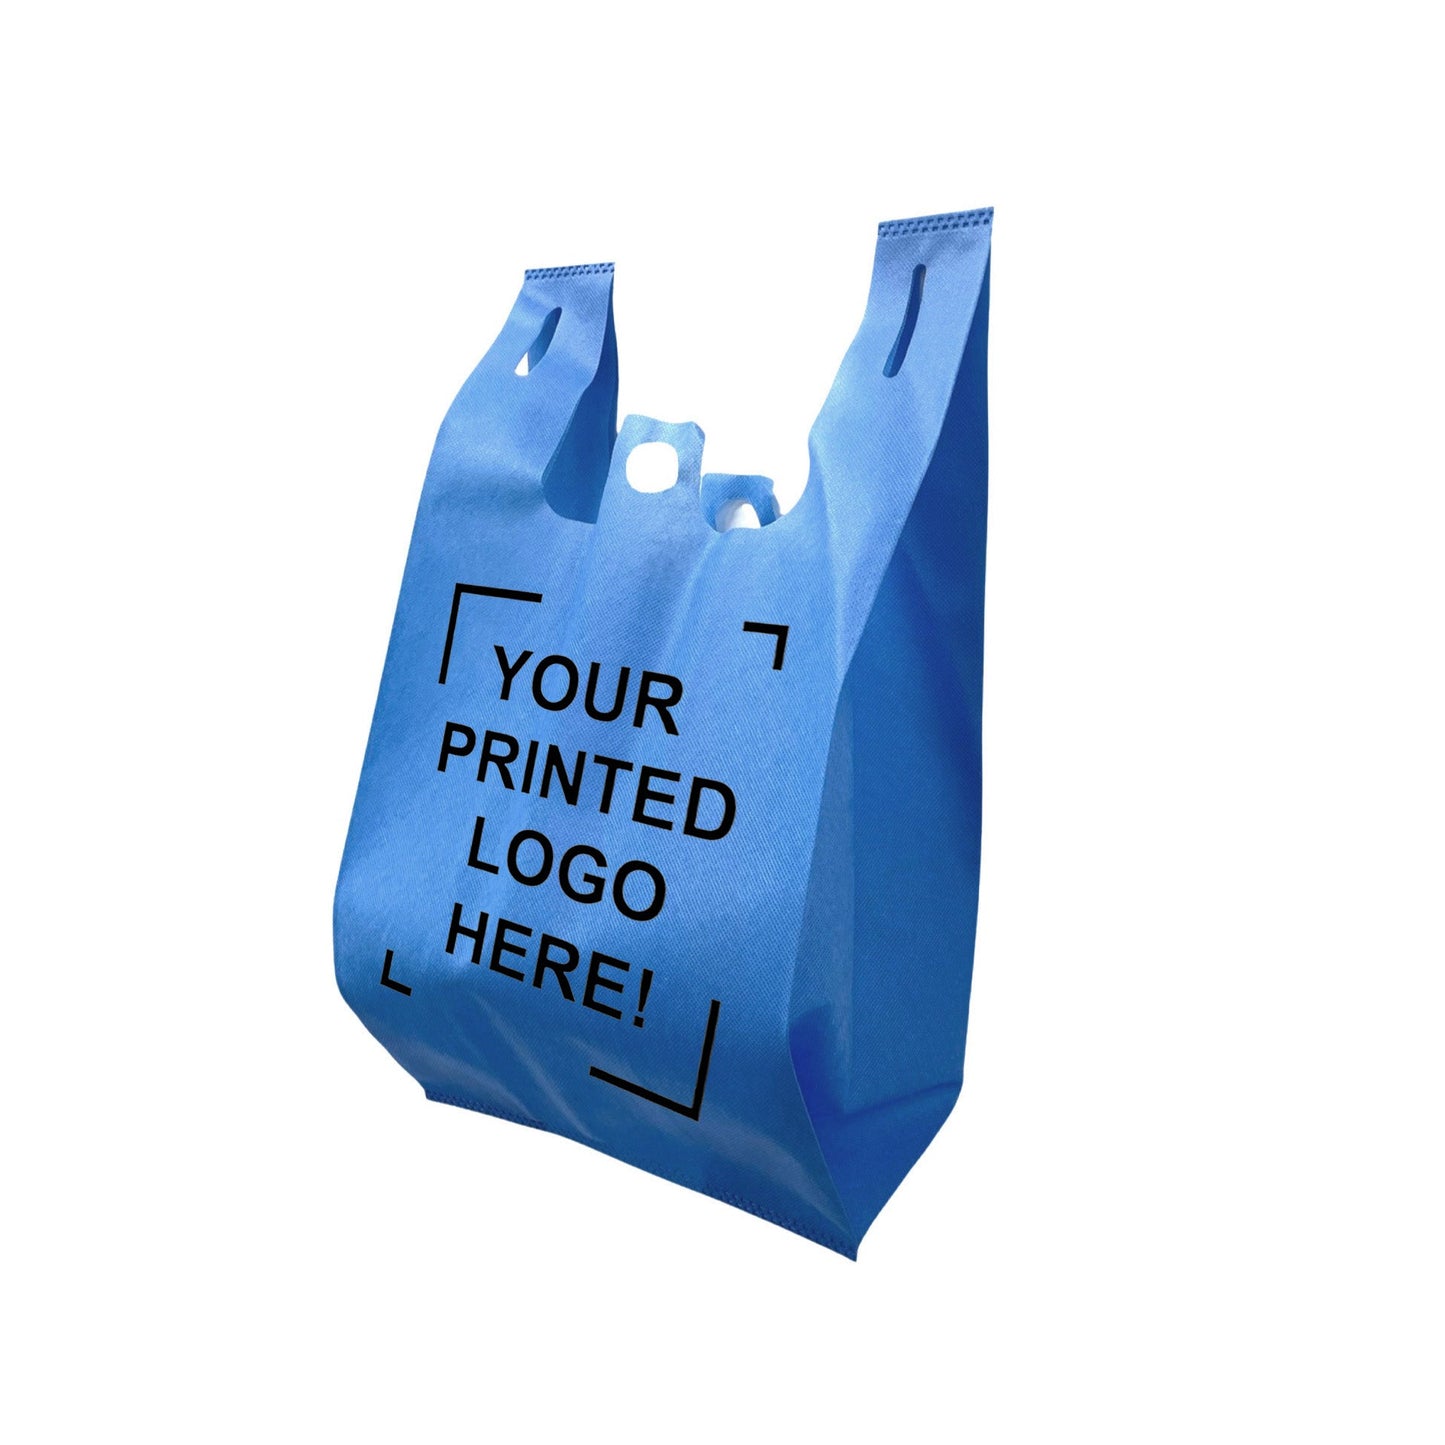 200pcs, Non-Woven Reusable T-Shirt Bag 12x7x22 inches Blue Shopping Bags Pinch Bottom, One Color Custom Print, Printed in Canada